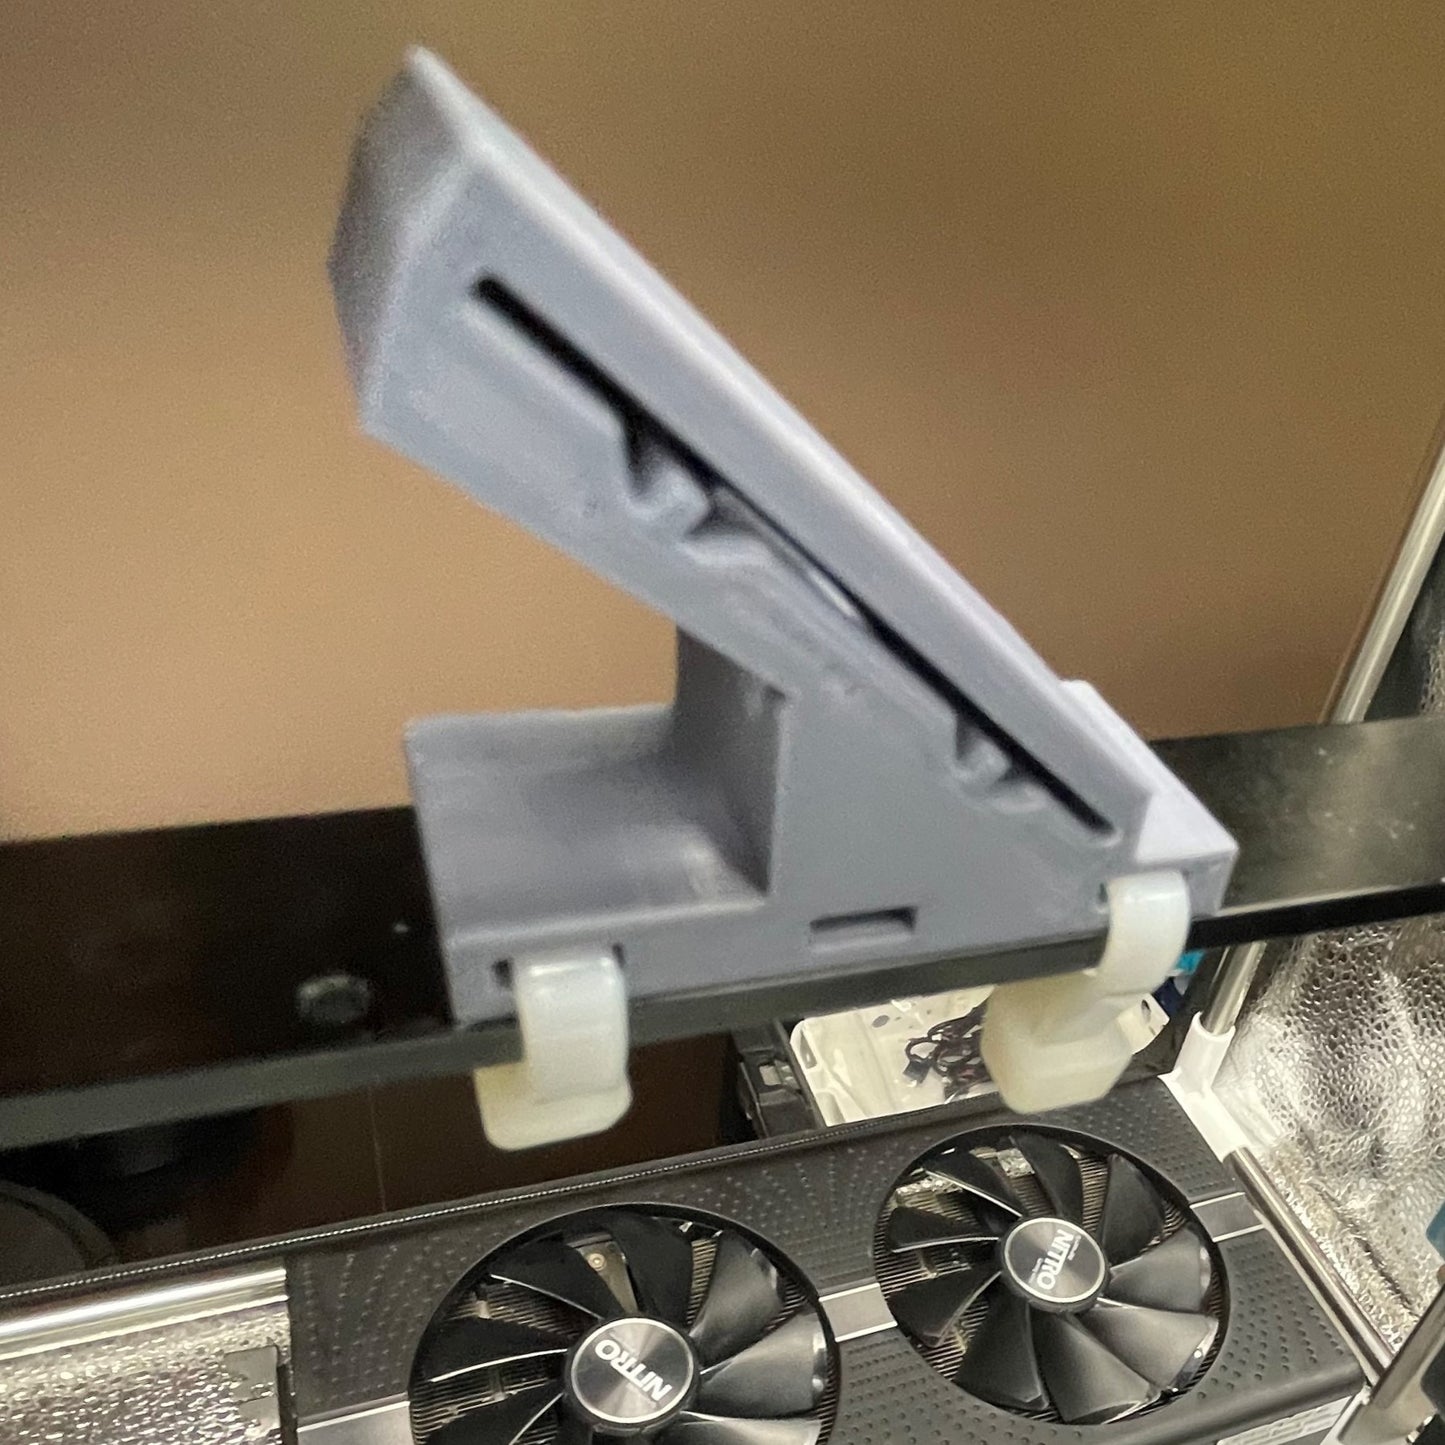 45 Degree GPU Mount For Mining Rigs - Middles